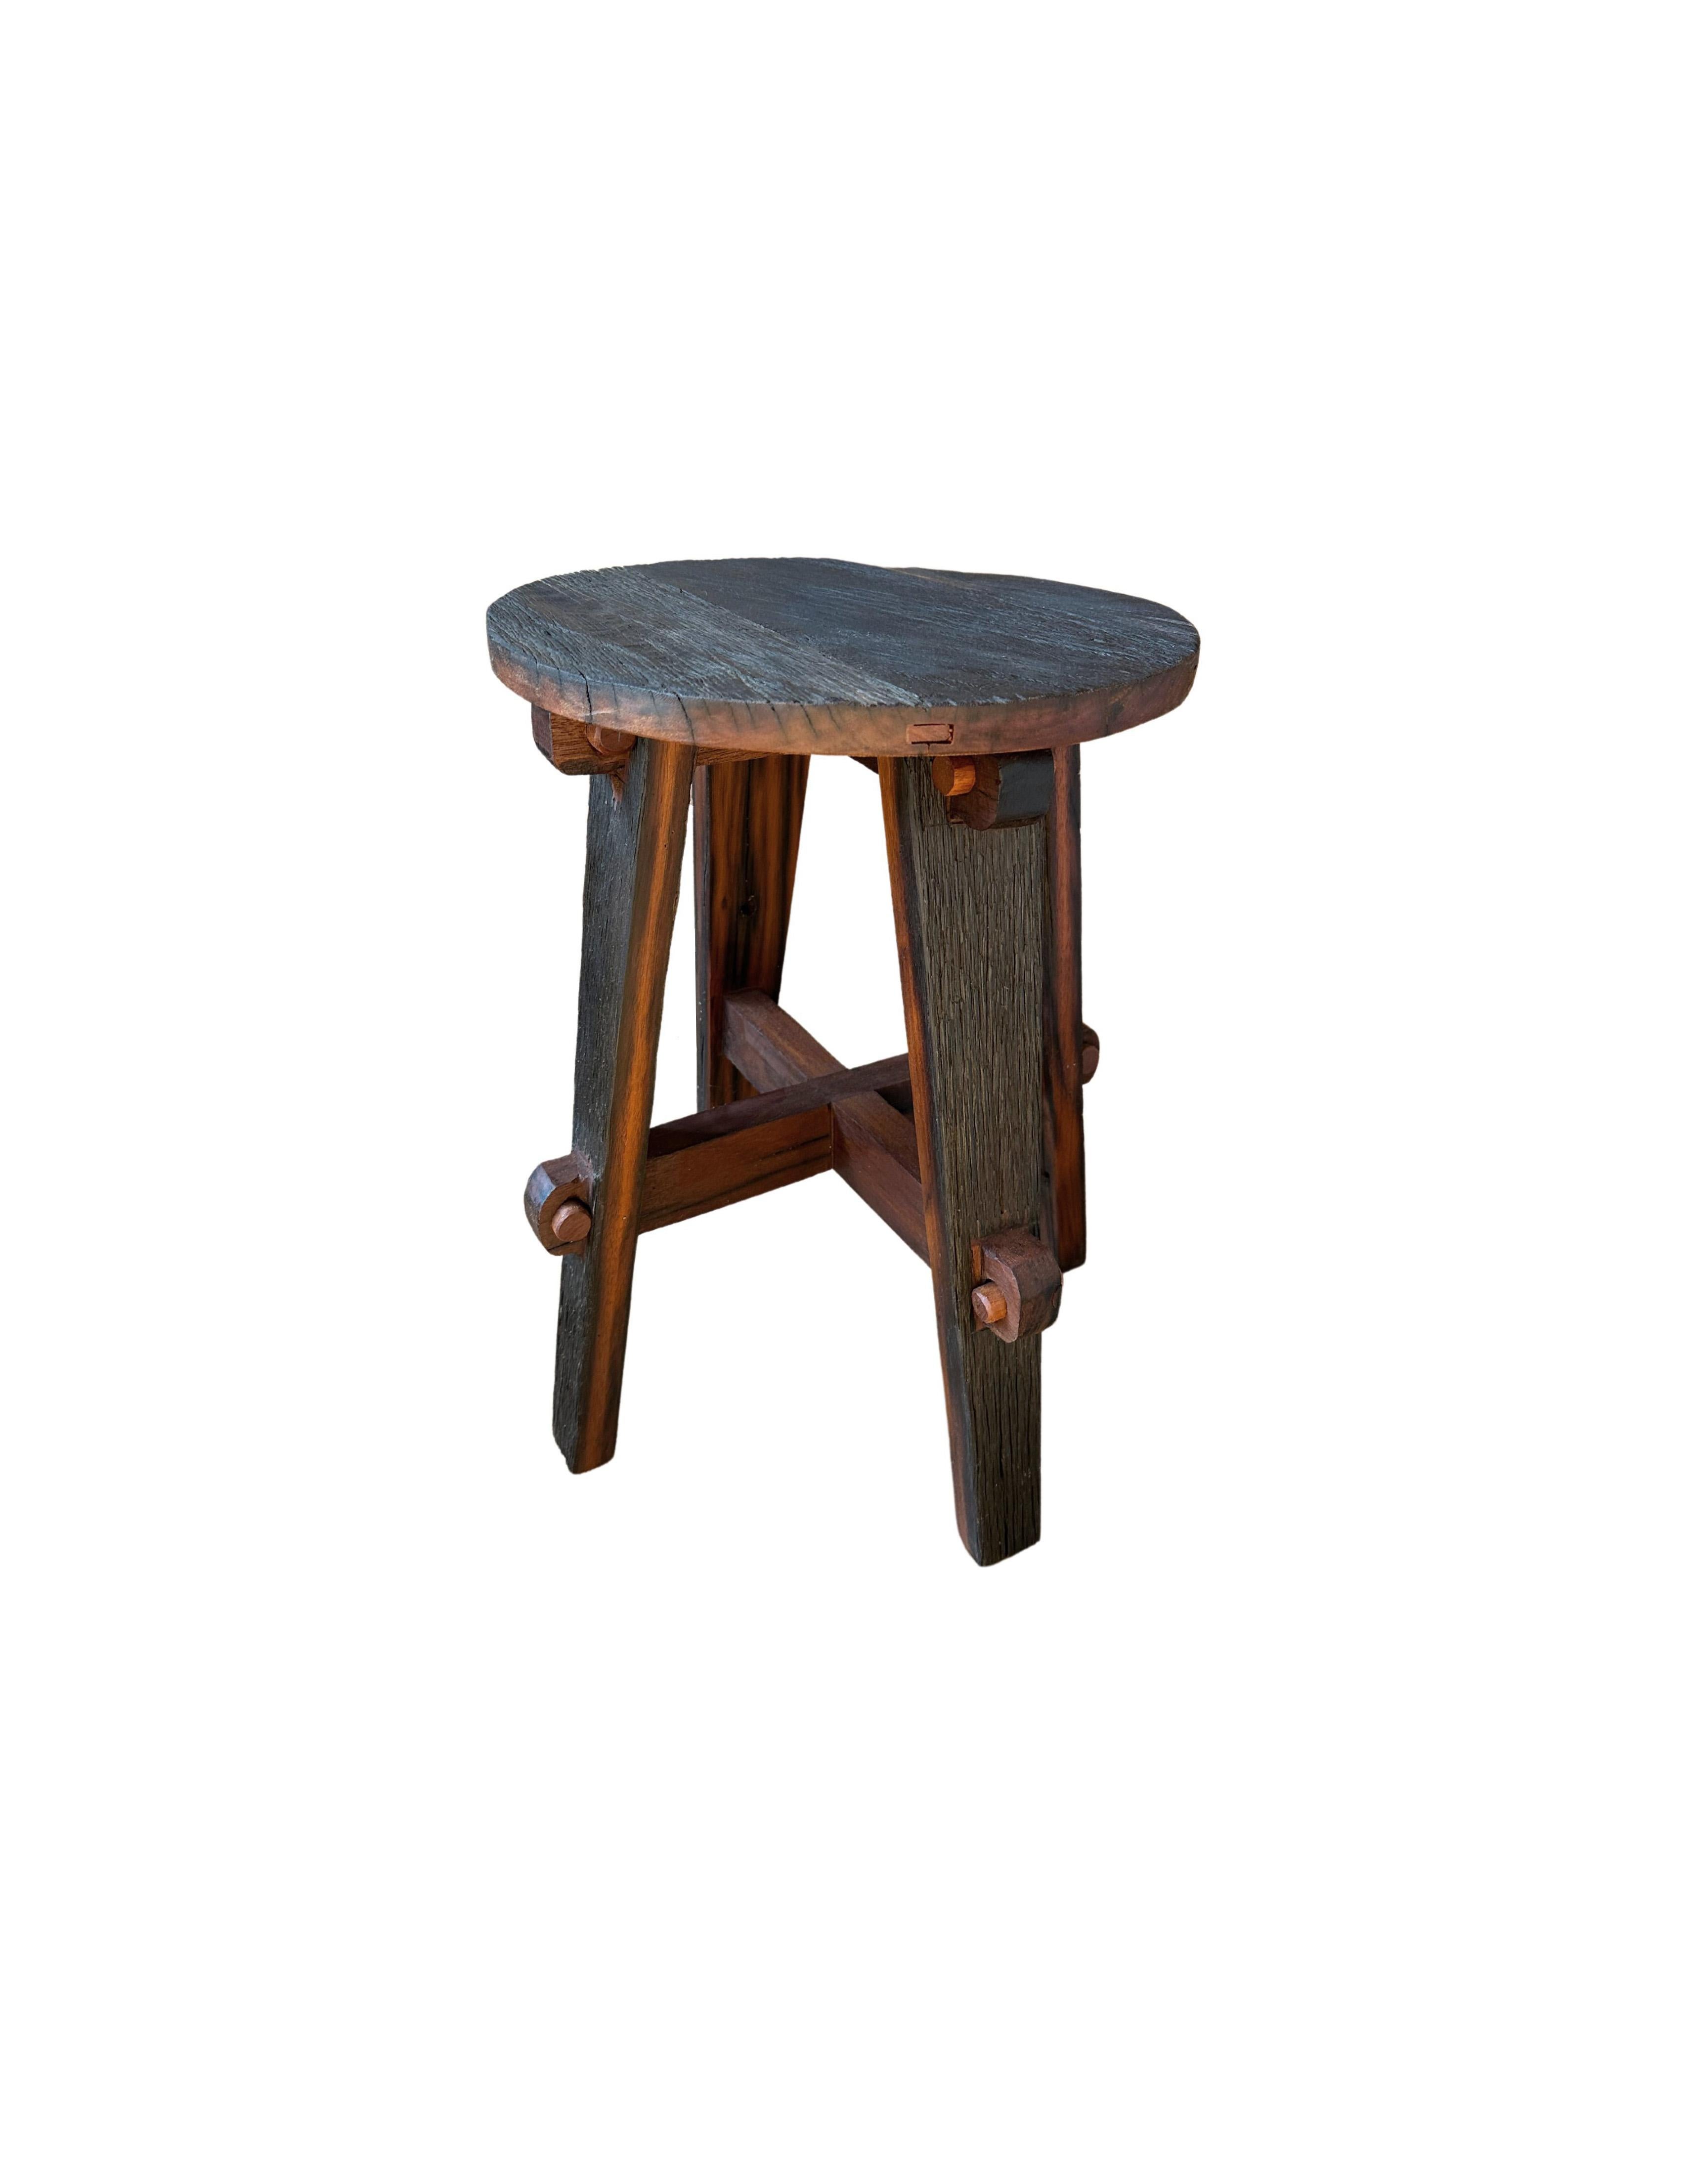 Indonesian Ironwood Stool Modern Organic, Hand Crafted with Artisanal Wood Joinery For Sale